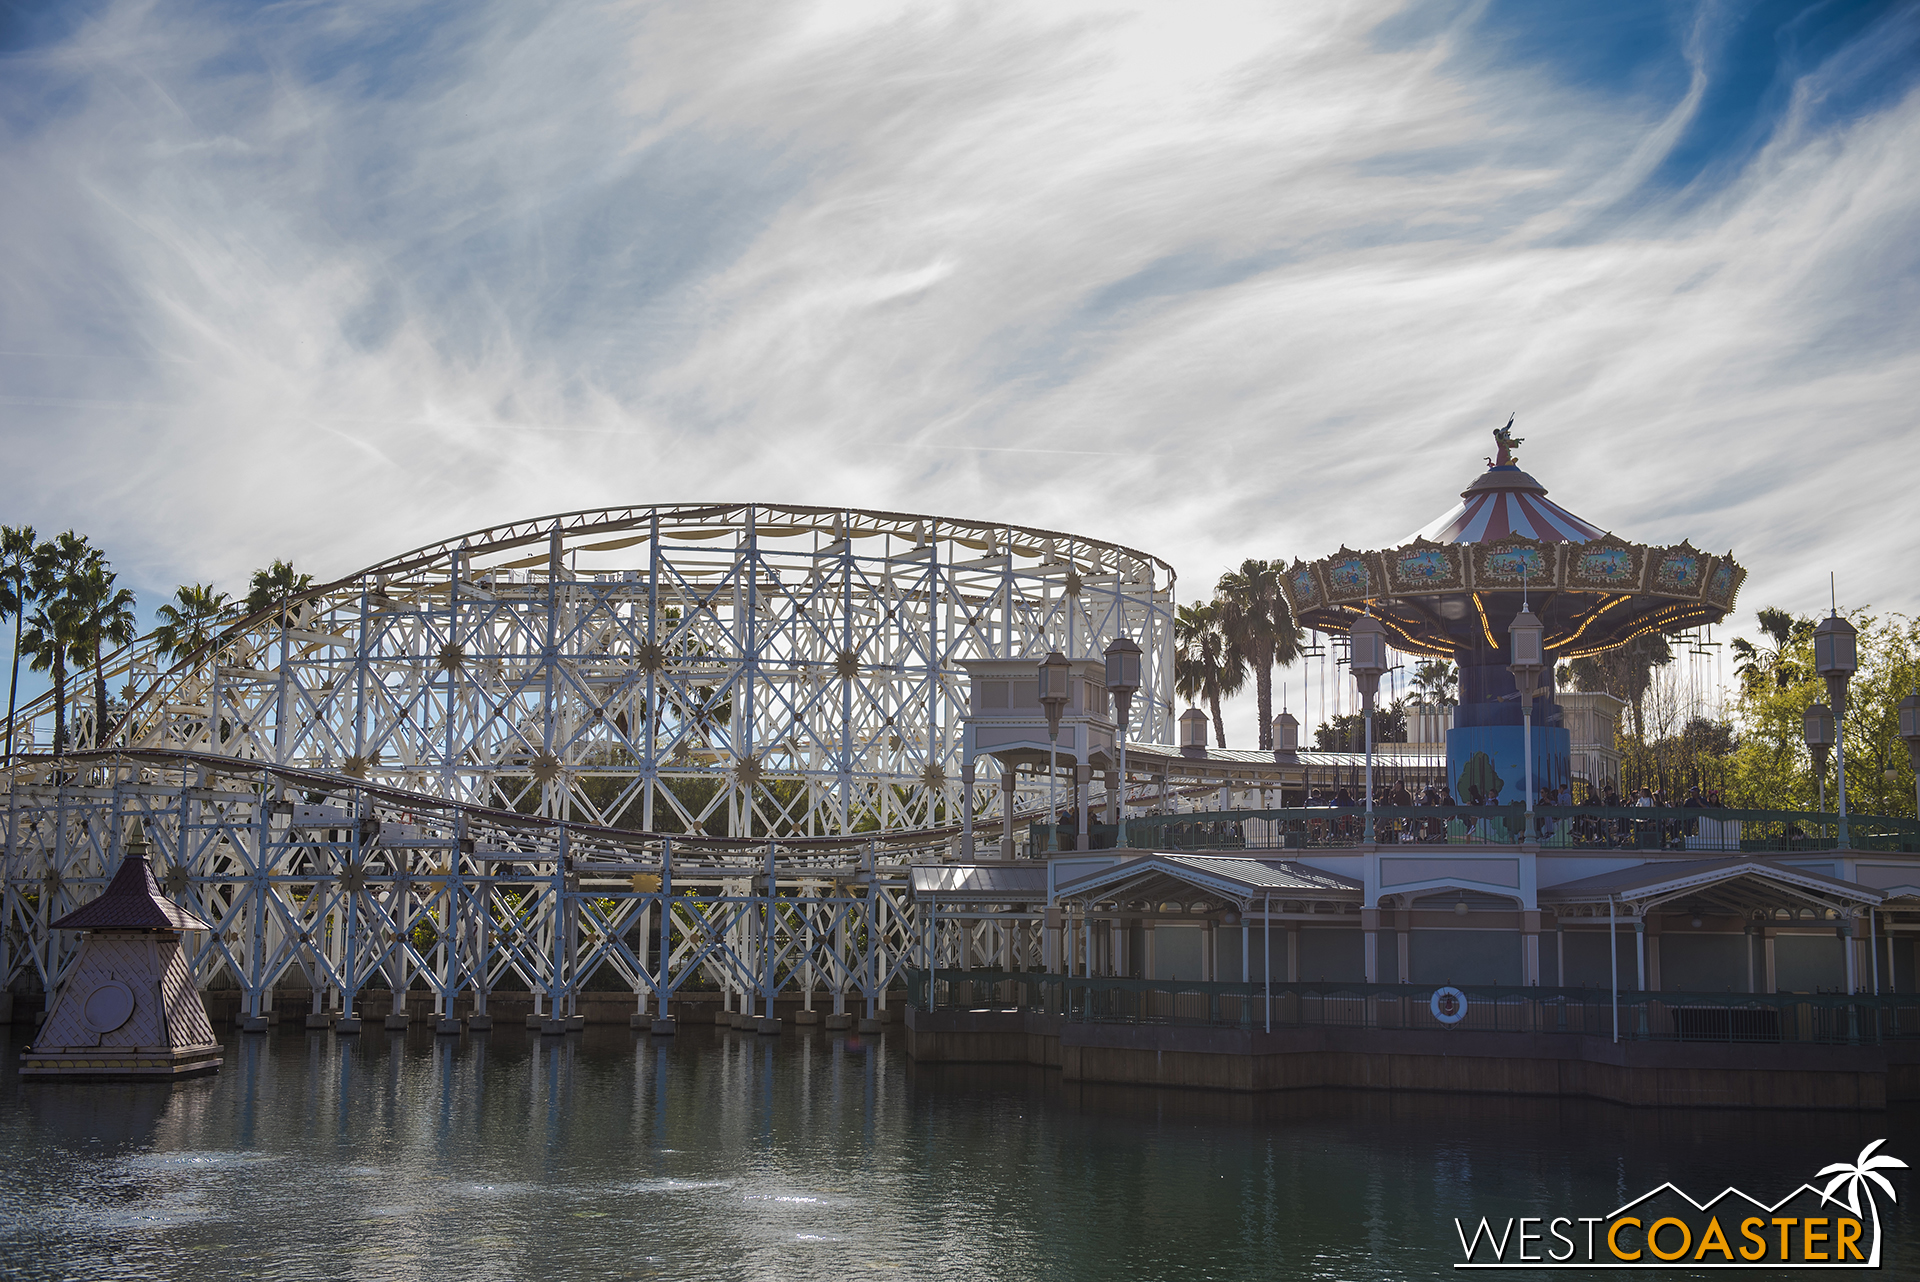  Here are daytime photos of Pixar Pier, so you can actually see what's going on. 